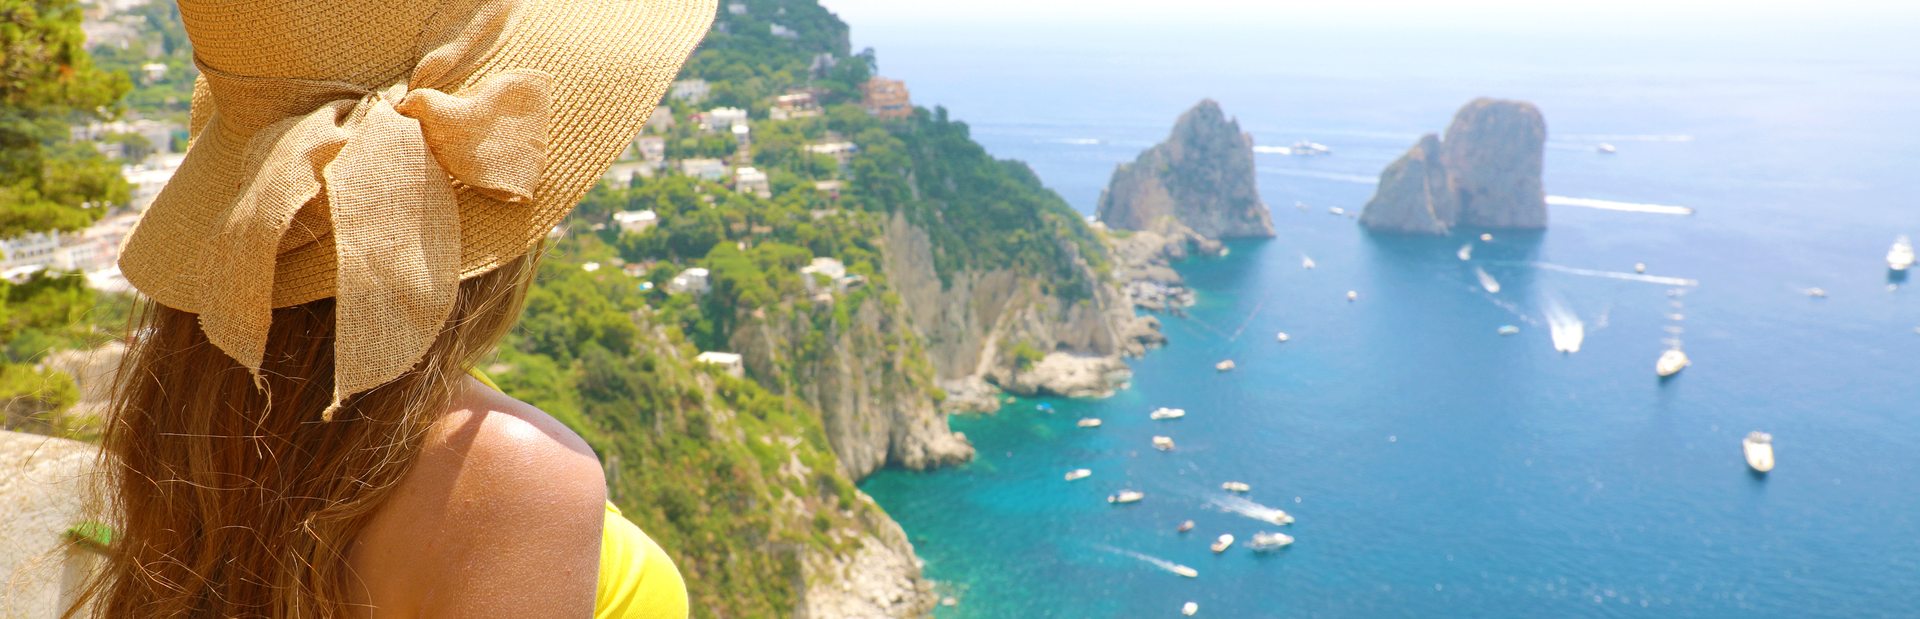 The culture of Capri: the must-see attractions on a private yacht charter